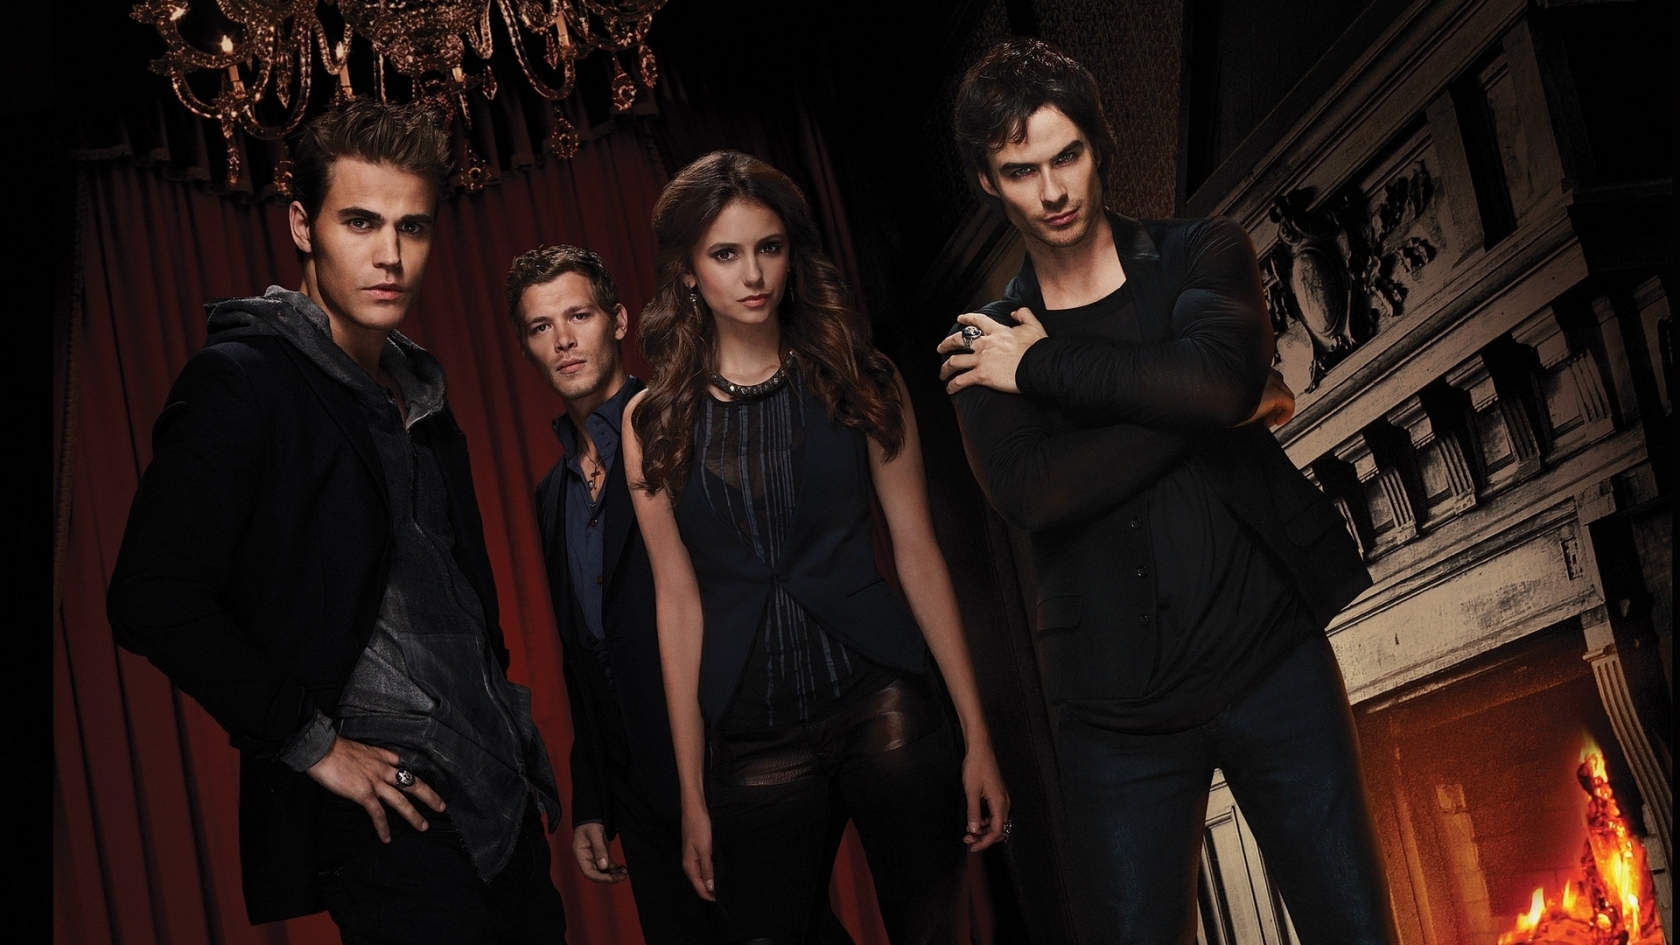 The Vampire Diaries Actors for 1680 x 945 HDTV resolution